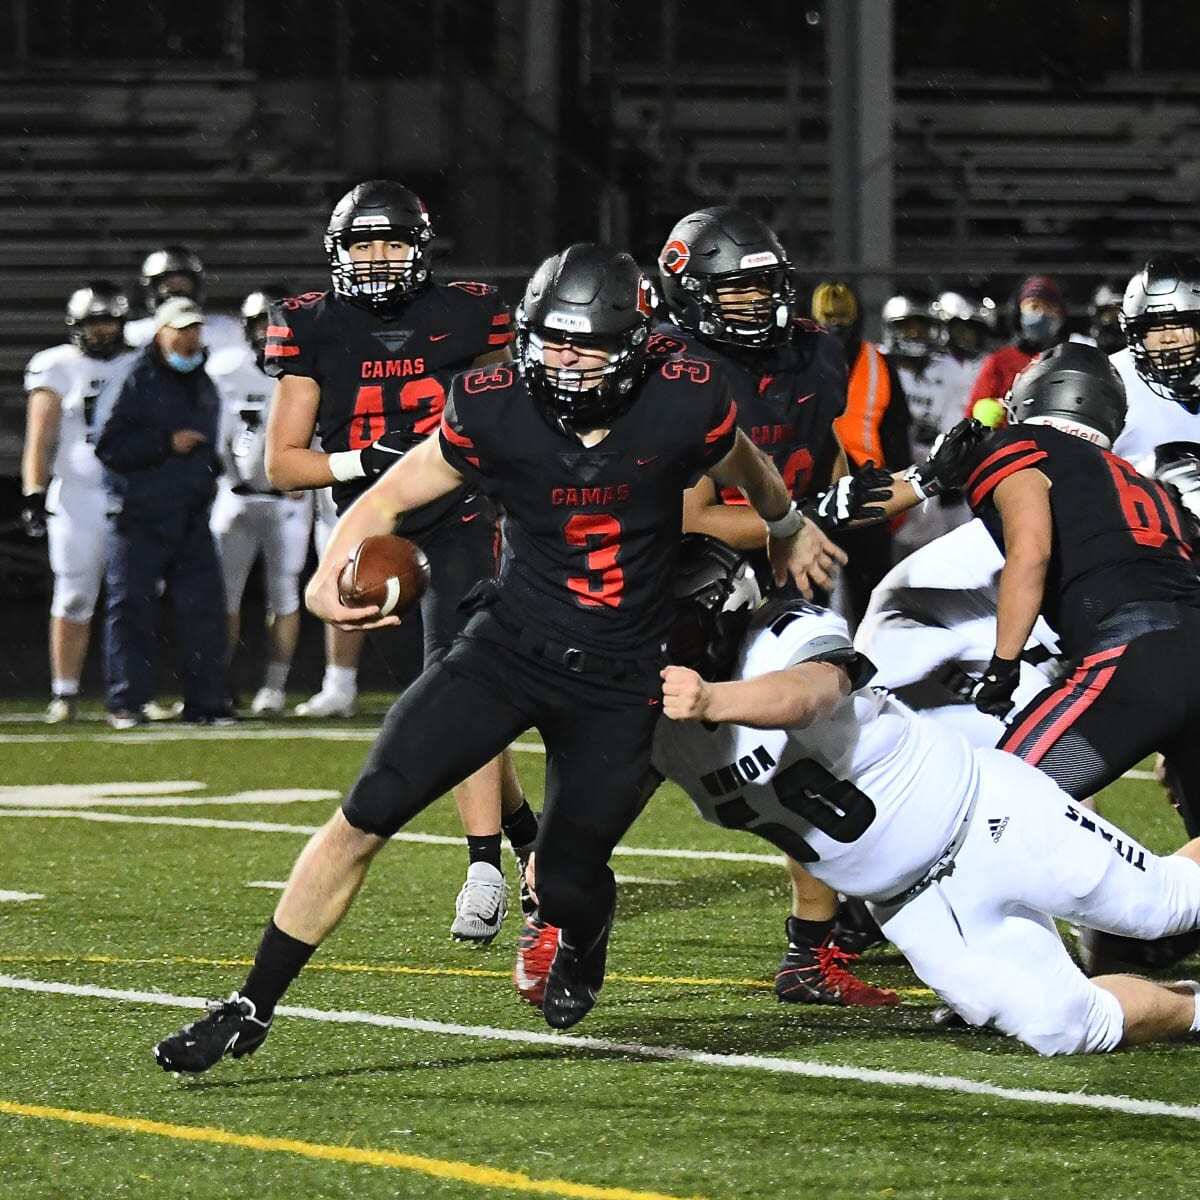 Jake Blair said he takes pride in representing not just his team but the community as the quarterback at Camas. Photo courtesy Kris Cavin